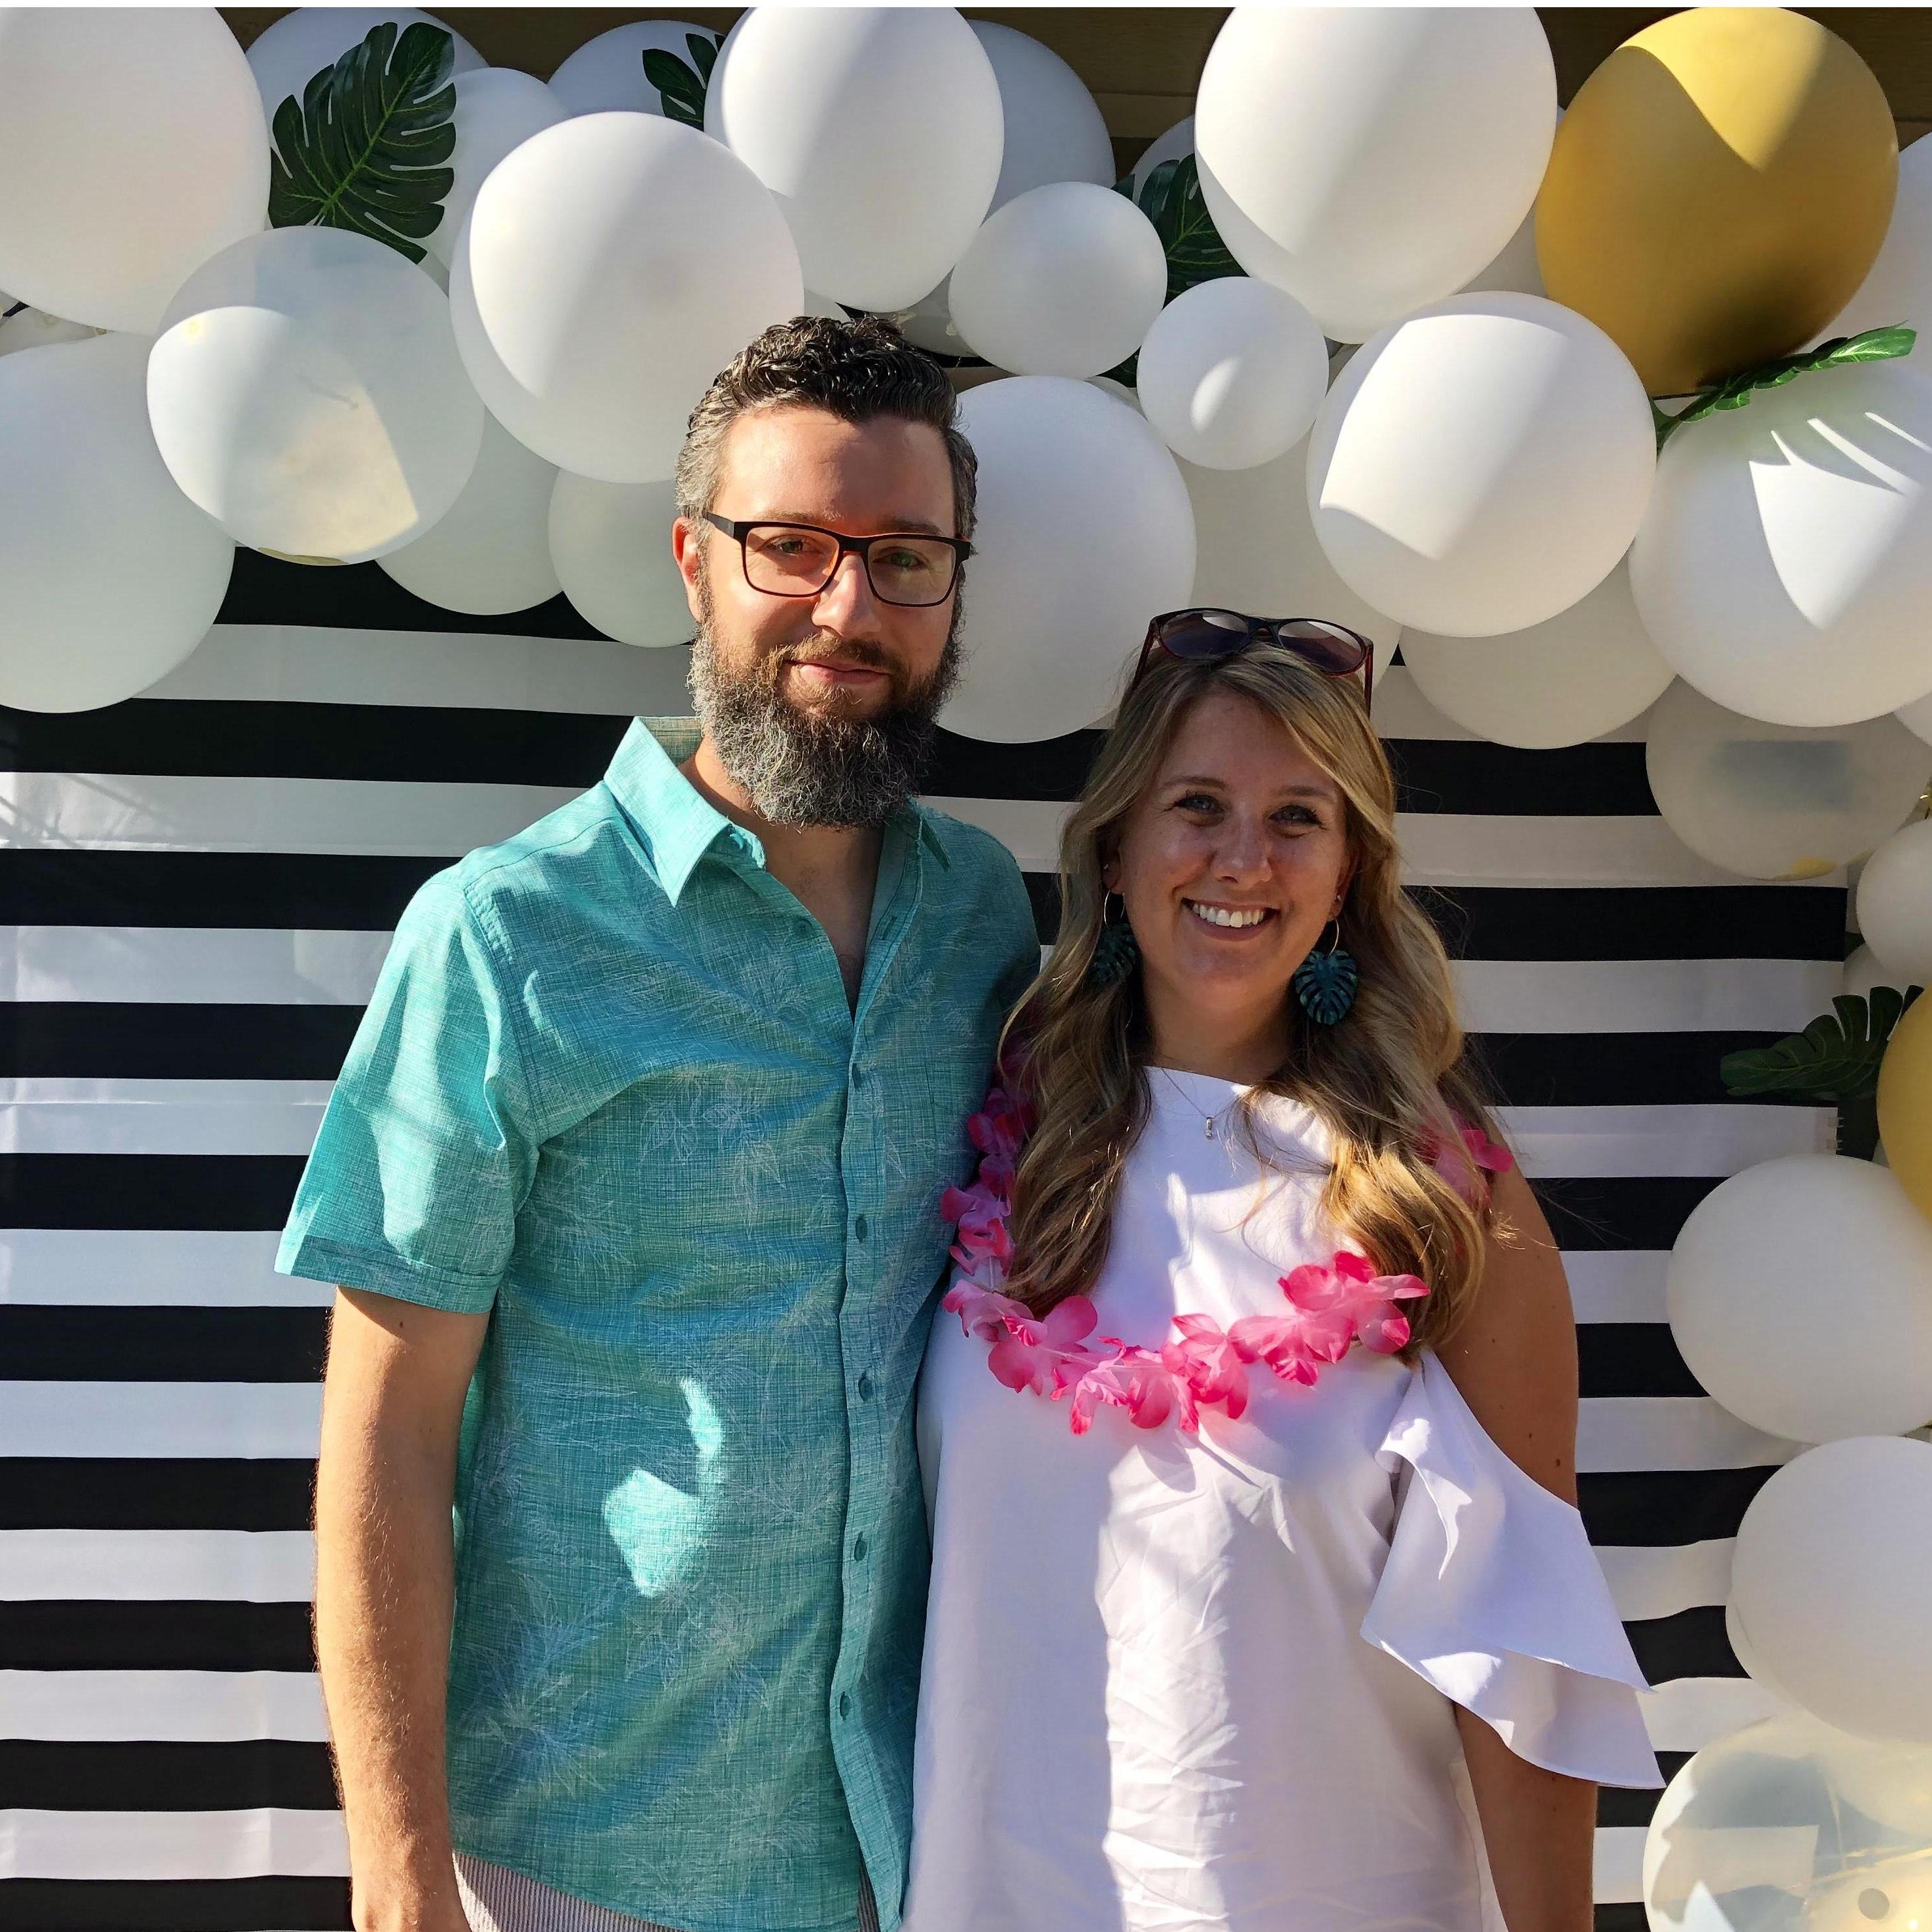 Our engagement party - July 2019